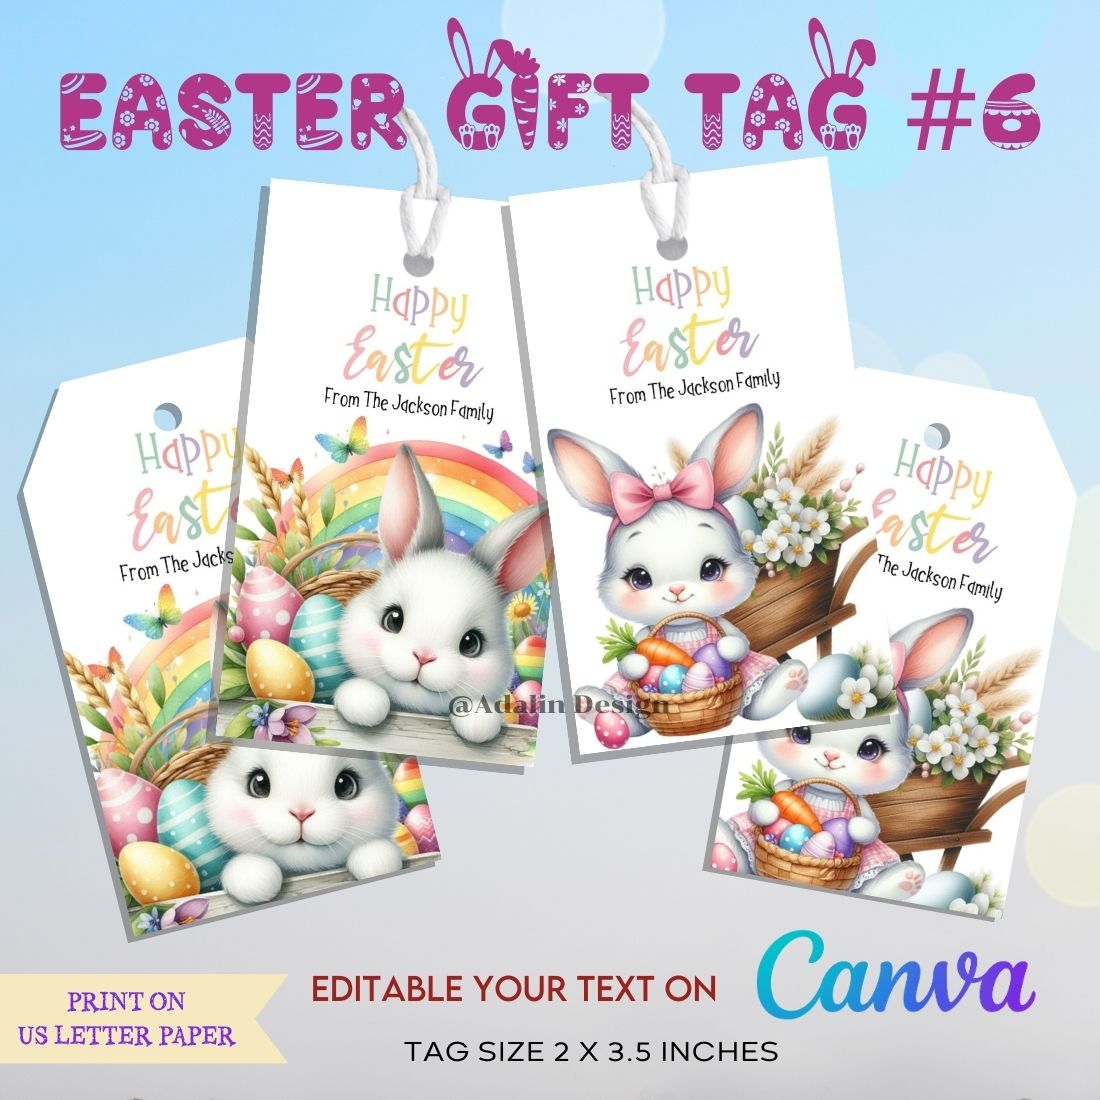 Easter Gift Tags #6 cover image.